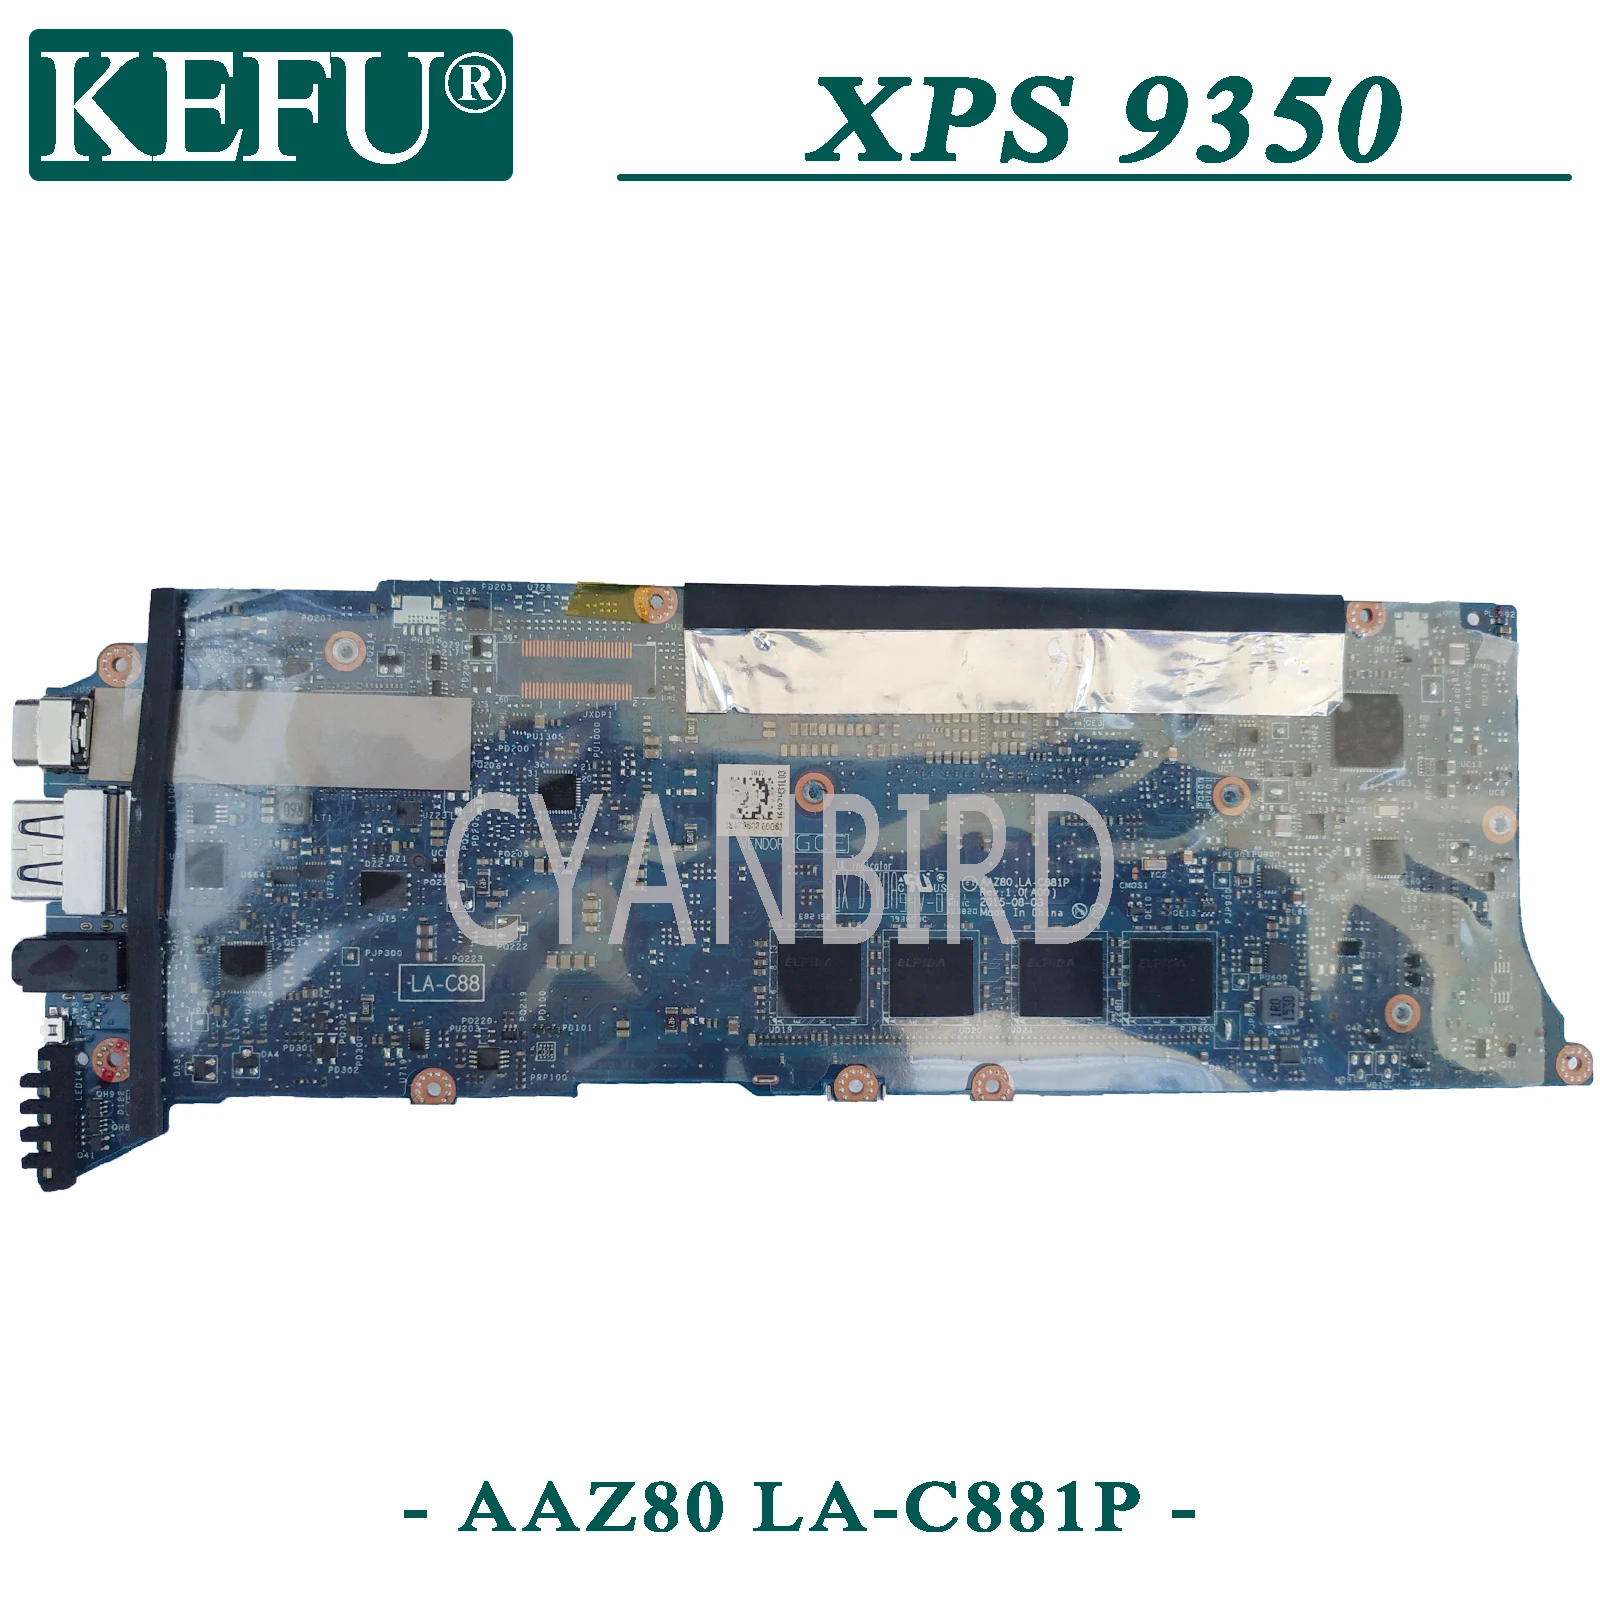 kefu aaz80 la c881p poriginal mainboard for dell xps 13 9350 with 8gb ram i5 6200u laptop motherboard free global shipping